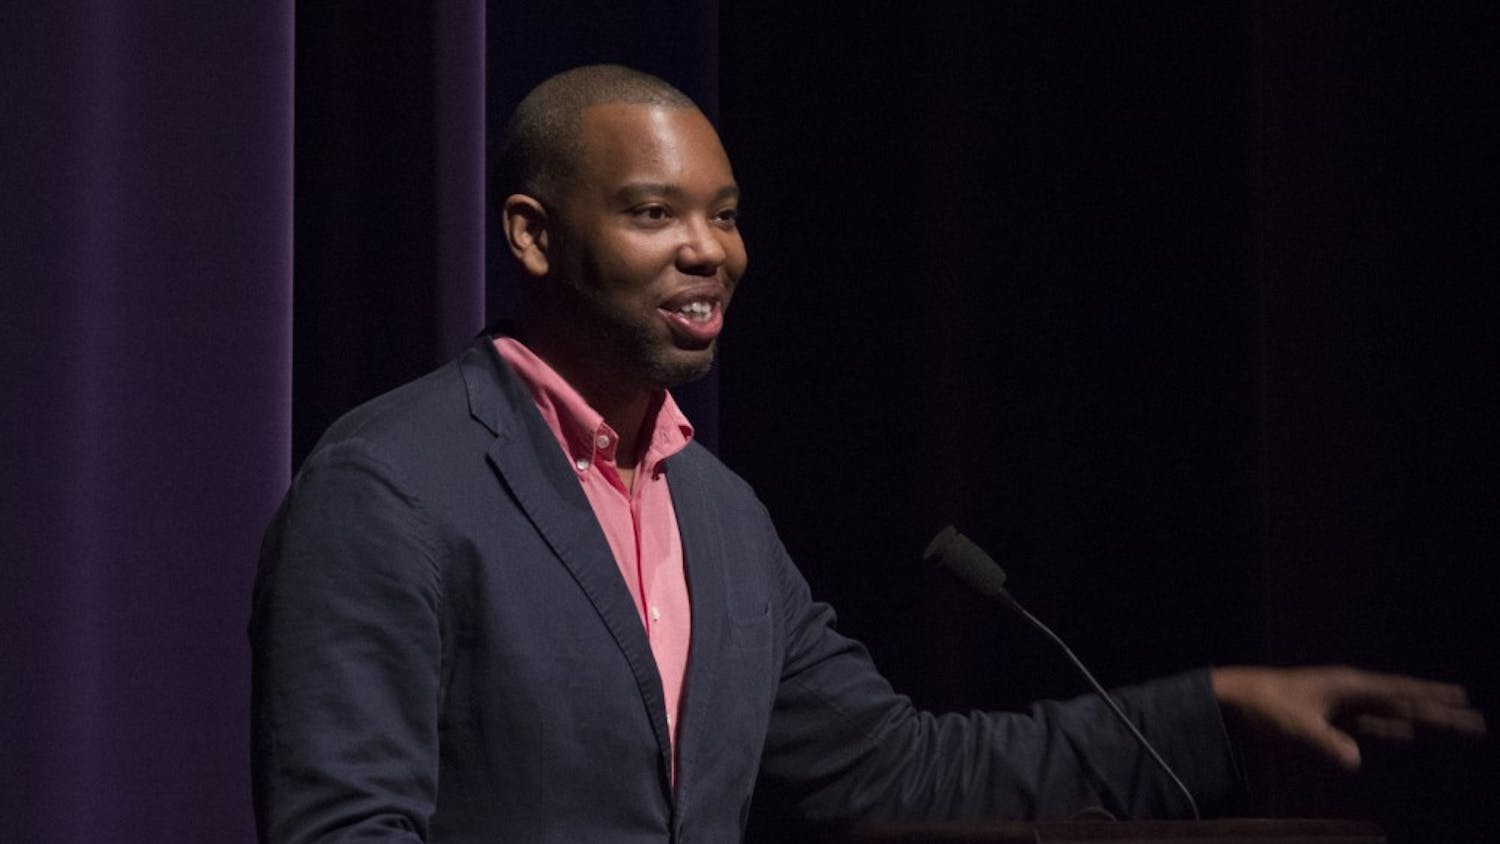 Ta-Nehisi Coates opens his lecture with a joke about the stage's open pit on Friday at the Musical Arts Center. Coates is a writer and journalist who spoke on being black in America, especially following the Ferguson shooting.